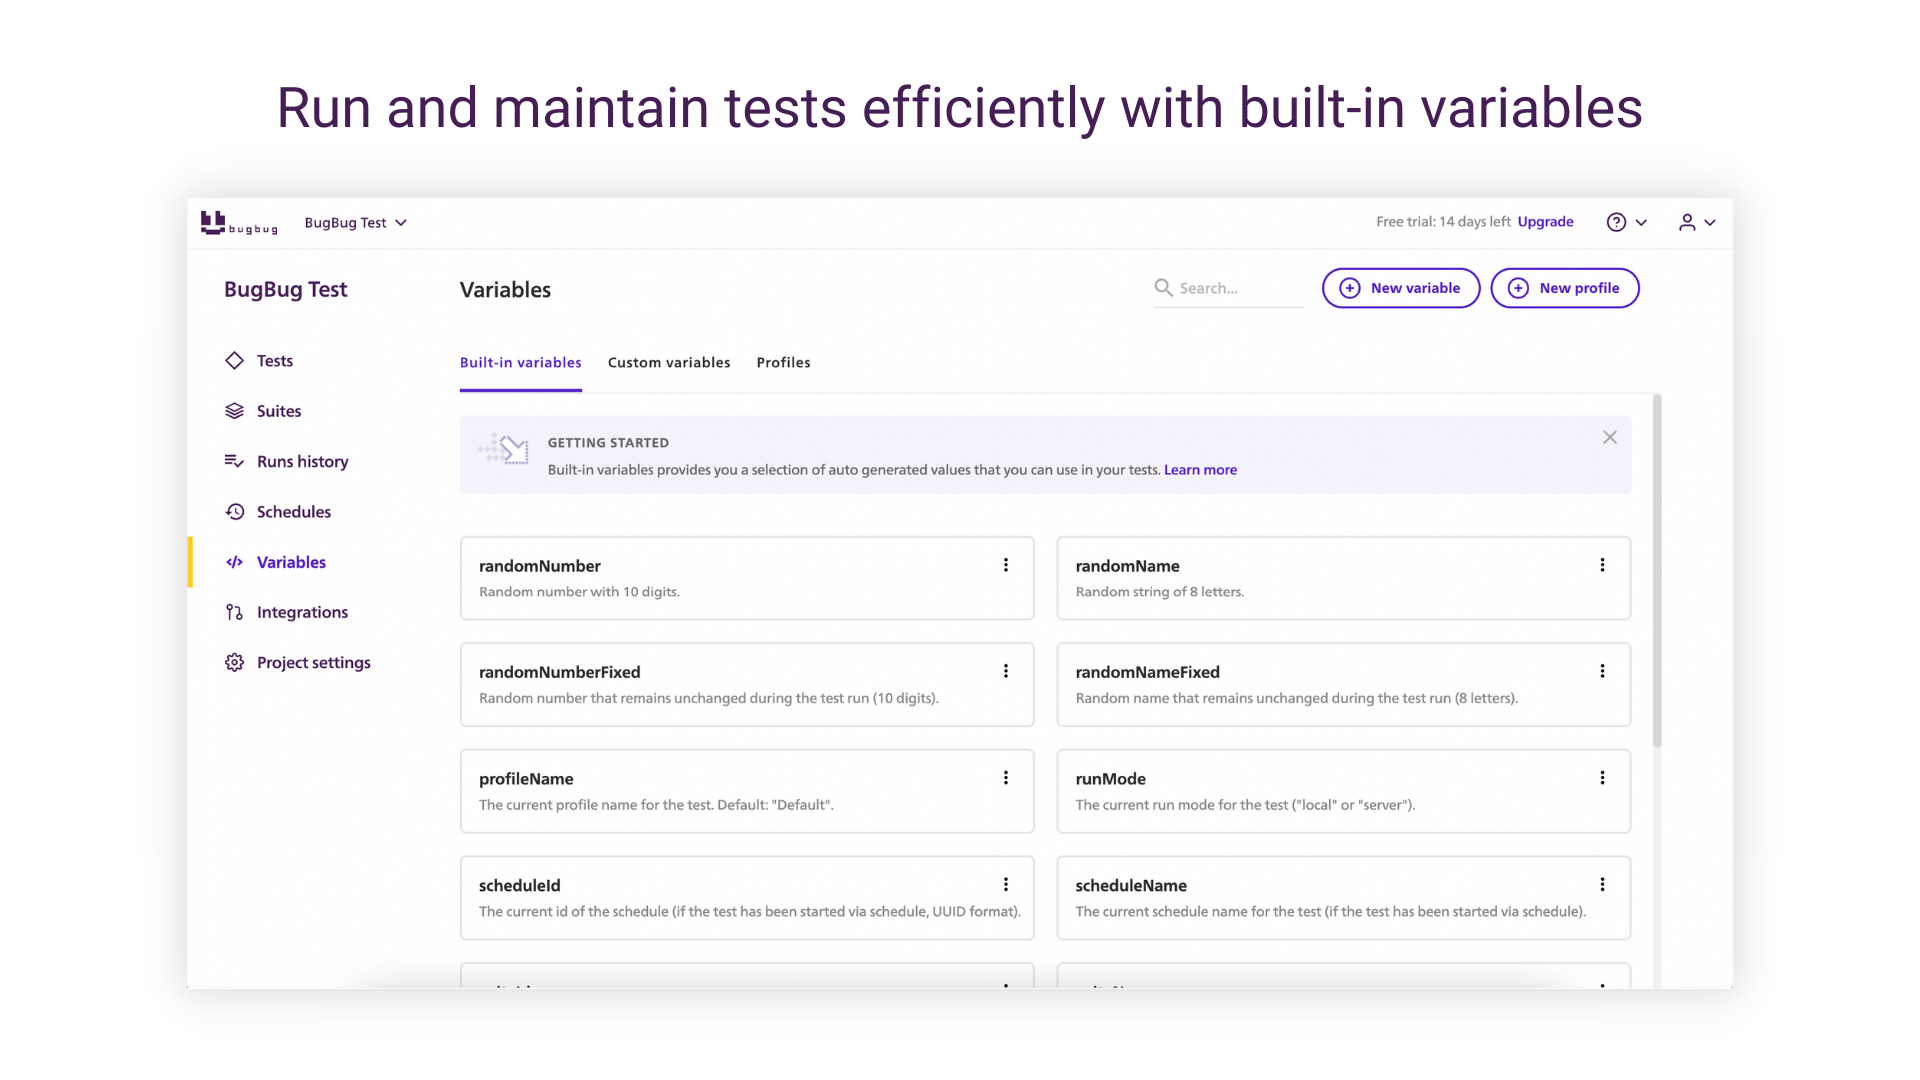 Run and maintain tests efficiently with built-in variables